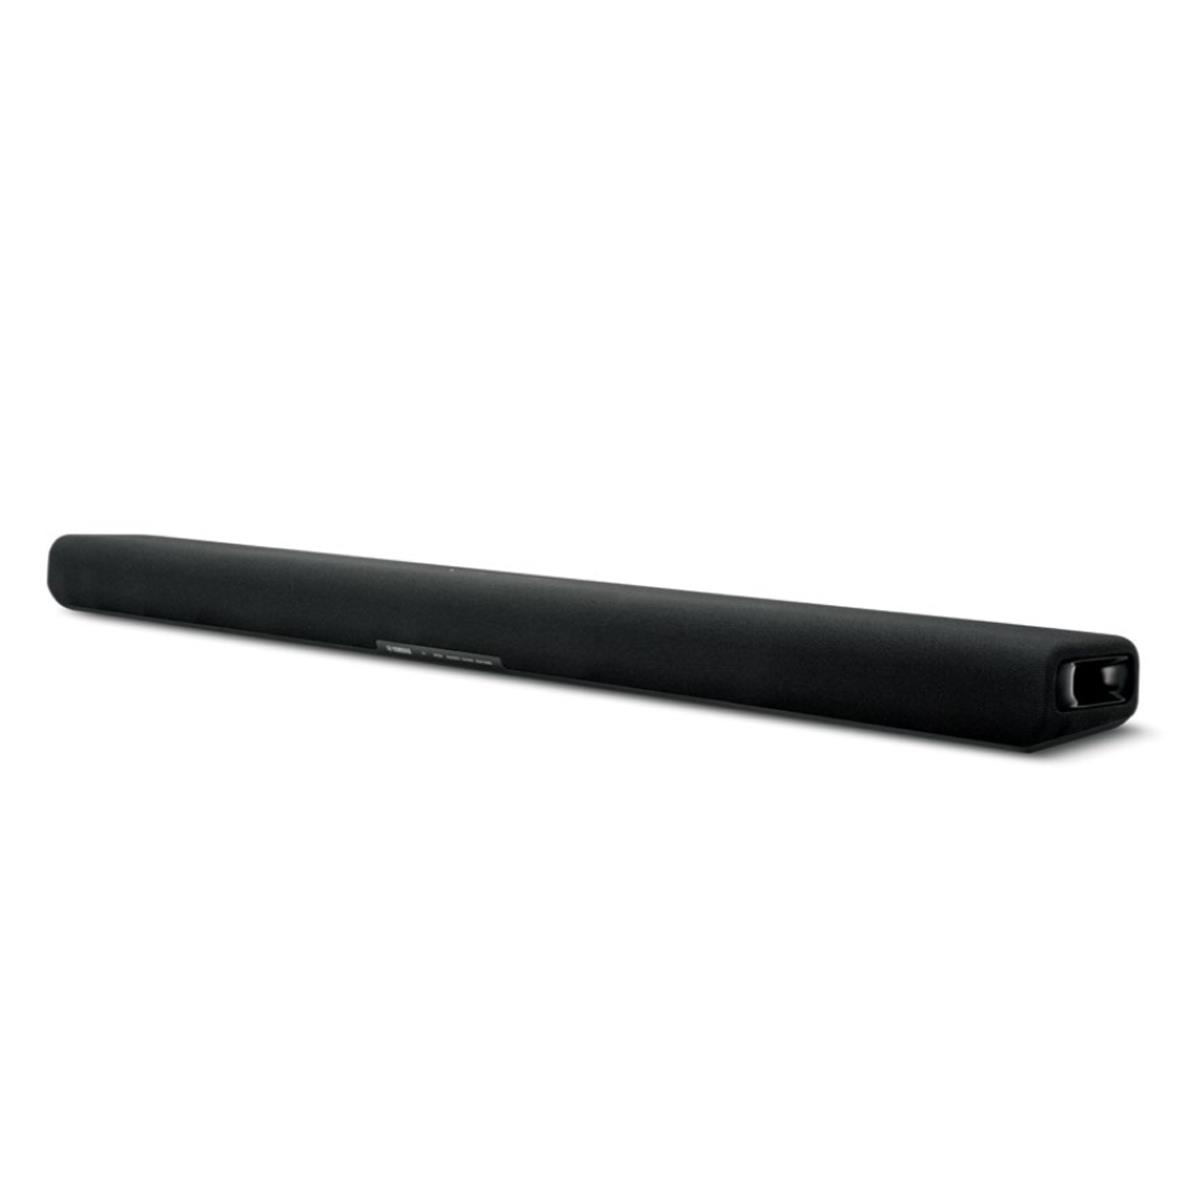 Image of Yamaha SR-B30A 120W Sound Bar with Built-In Subwoofers